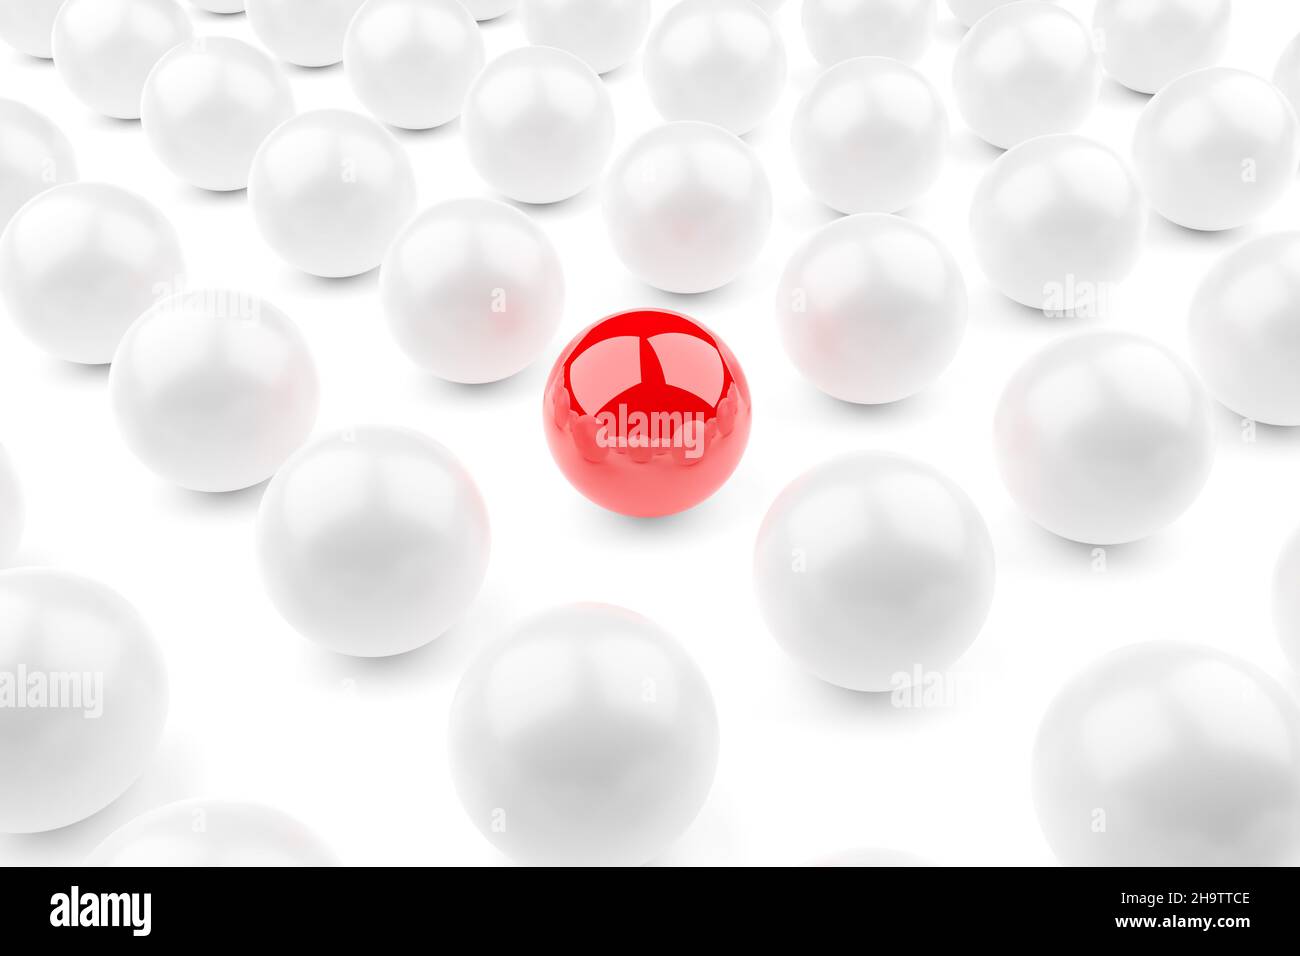 Single red sphere in the middle of group of white spheres over white background, team, leadership or individuality concept, 3d illustration Stock Photo